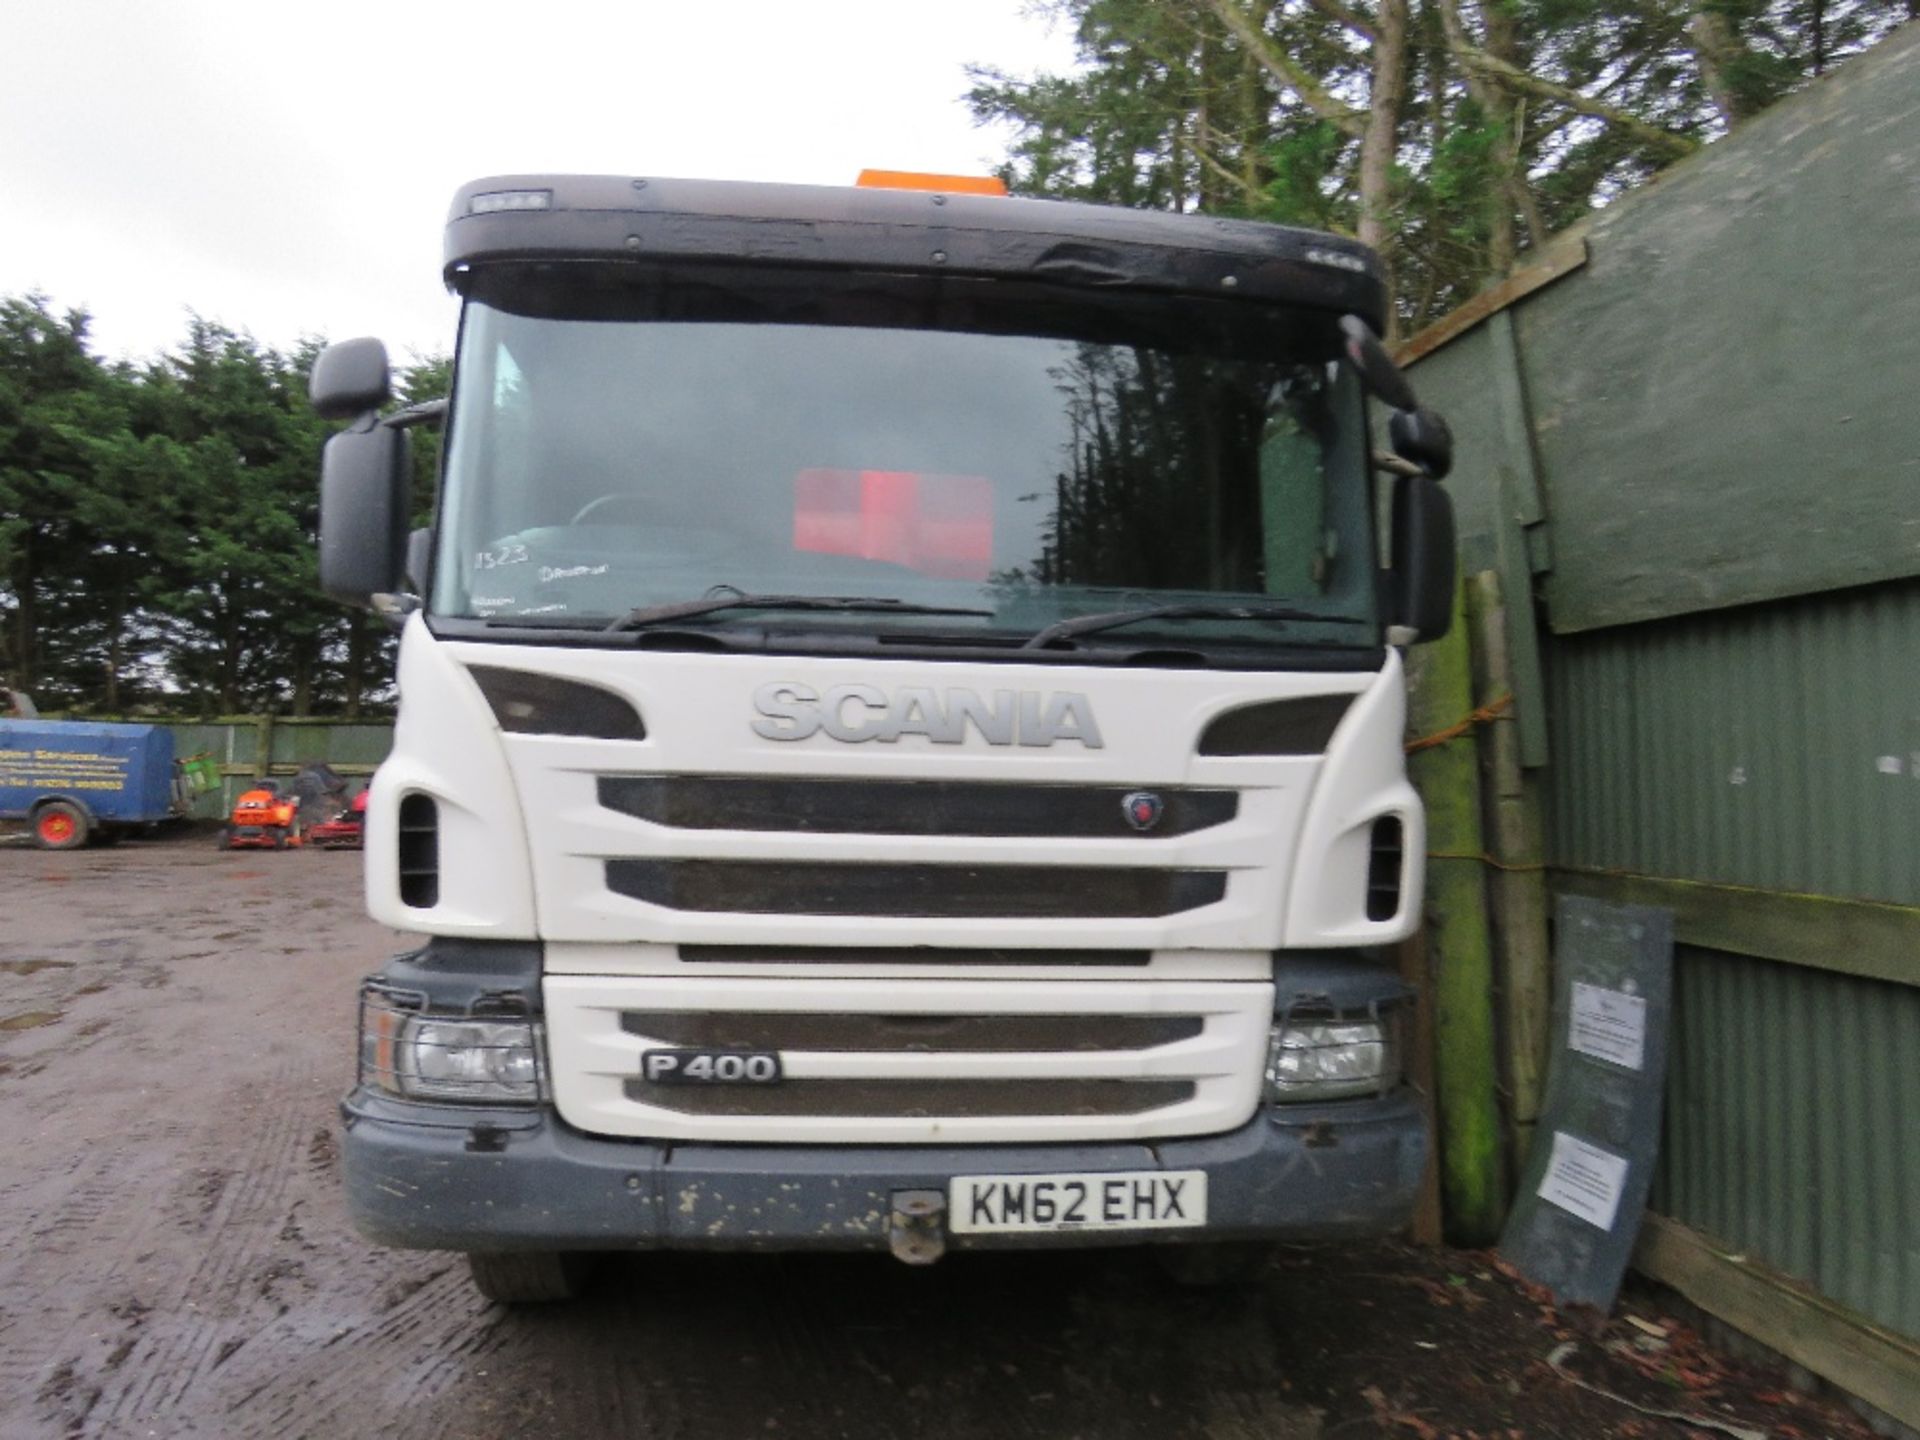 SCANIA P400 8X4 TIPPER LORRY REG:KM62 EHX. SEMI AUTO GEARBOX. 2013 REGISTERED. TESTED TILL MARCH 202